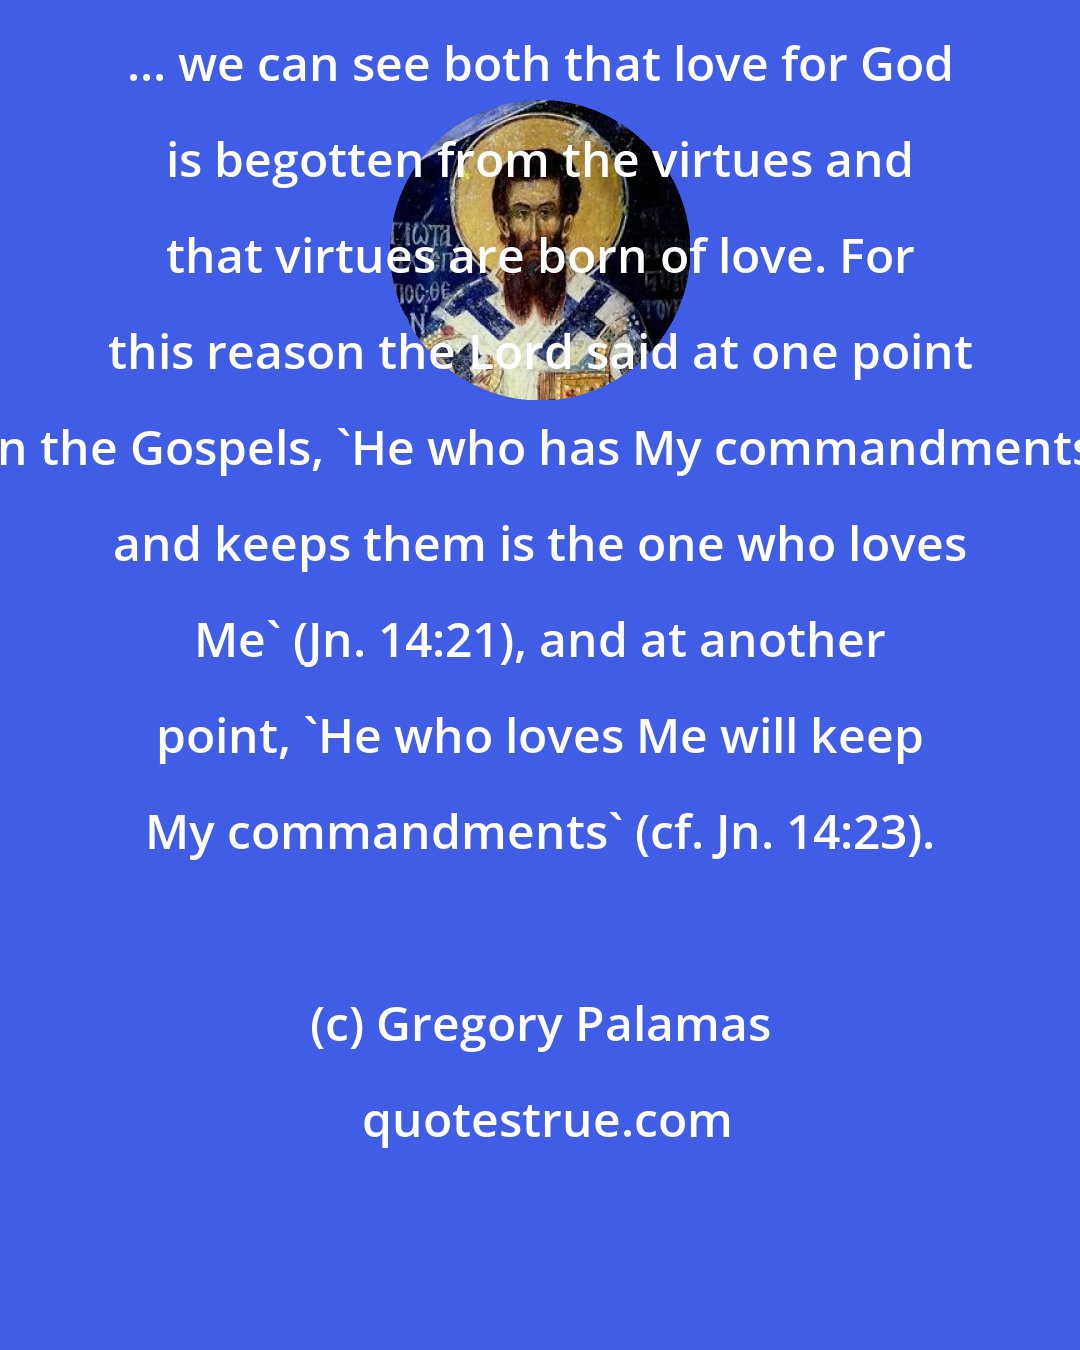 Gregory Palamas: ... we can see both that love for God is begotten from the virtues and that virtues are born of love. For this reason the Lord said at one point in the Gospels, 'He who has My commandments and keeps them is the one who loves Me' (Jn. 14:21), and at another point, 'He who loves Me will keep My commandments' (cf. Jn. 14:23).